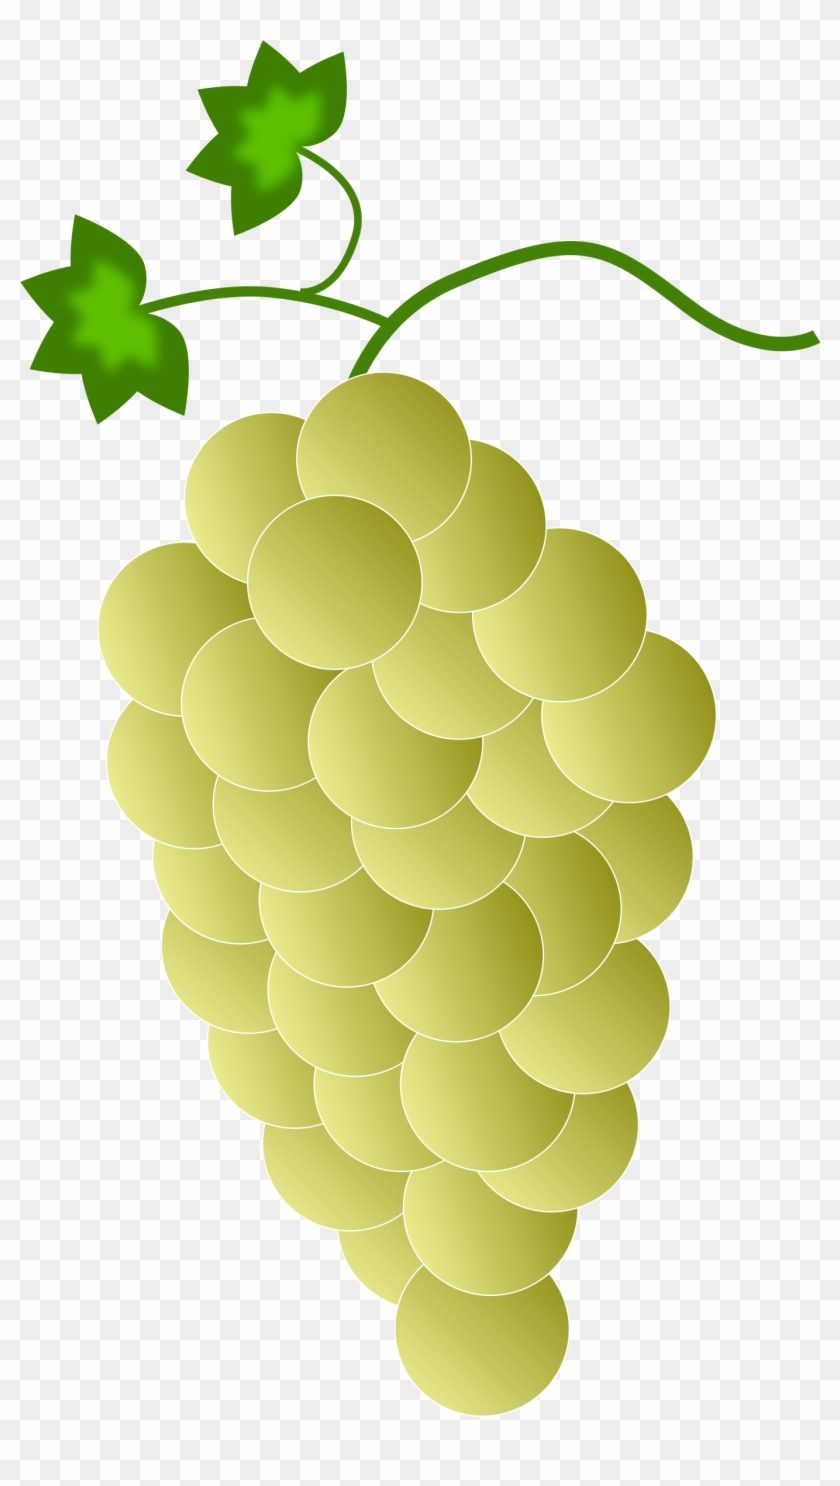 Clipart Yellow Grapes - Yellow Grapes Clipart #391475